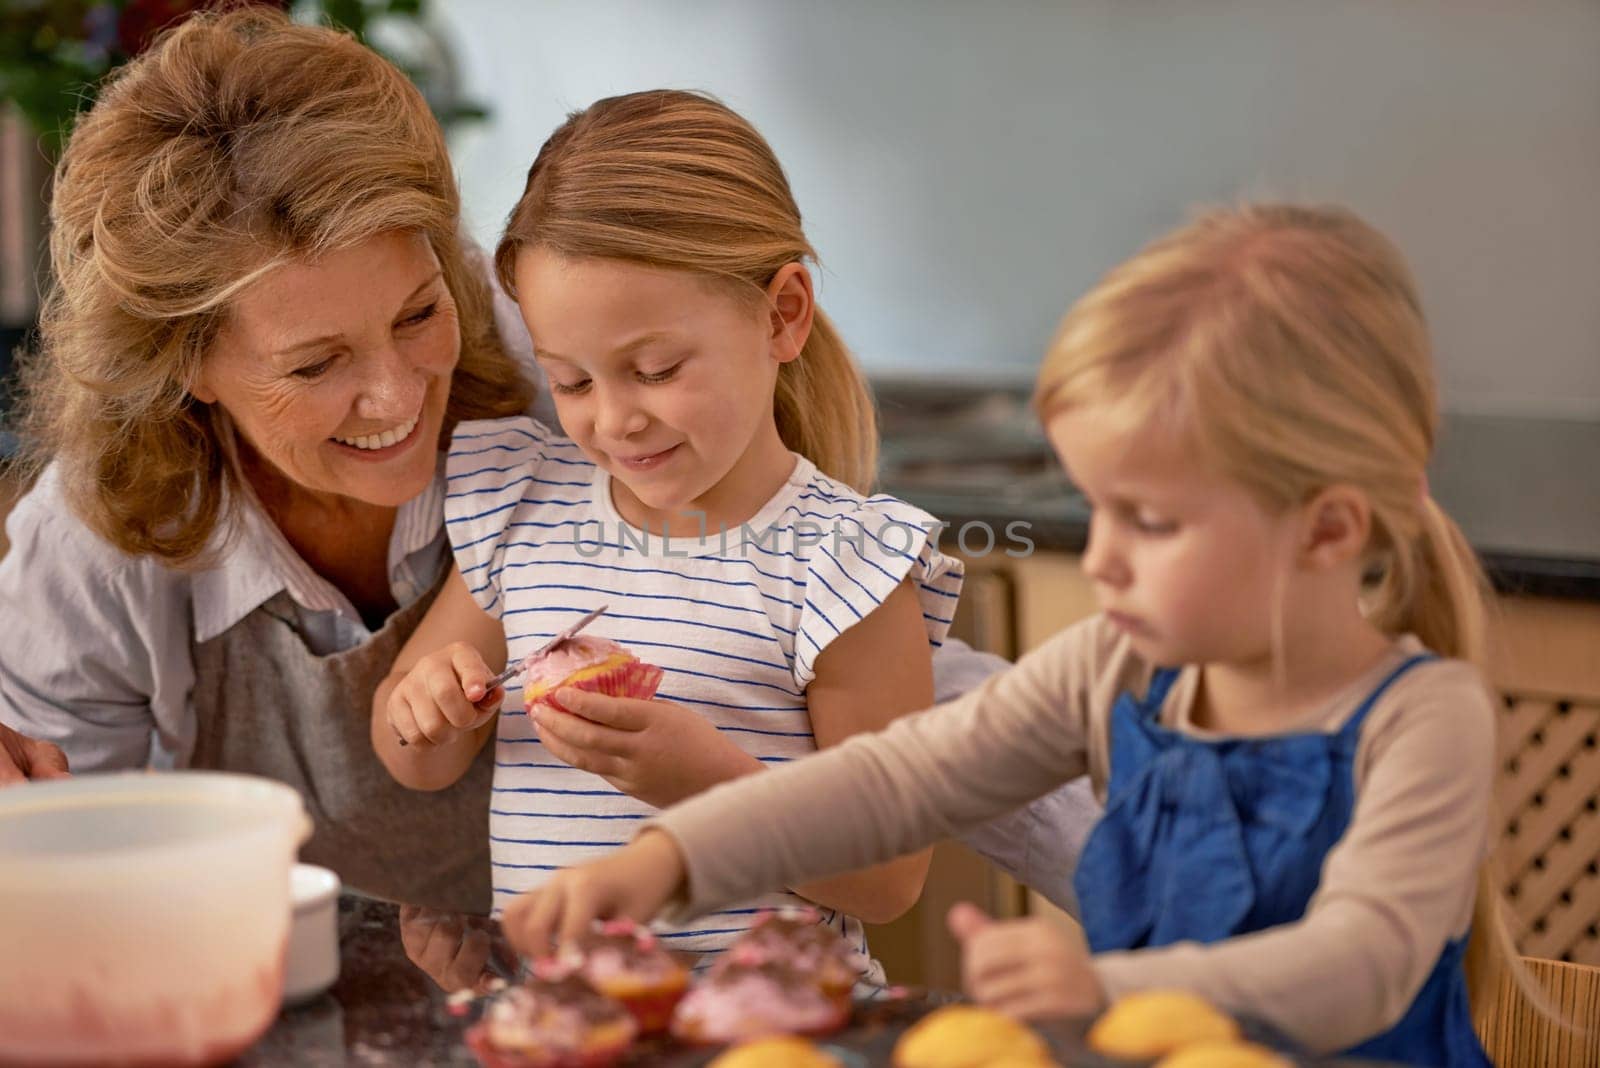 Grandmother, children and baking cupcake or teaching with icing decorations or learning creativity, bonding or teamwork. Woman, siblings and sweet dessert or helping with ingredients, snack or fun.